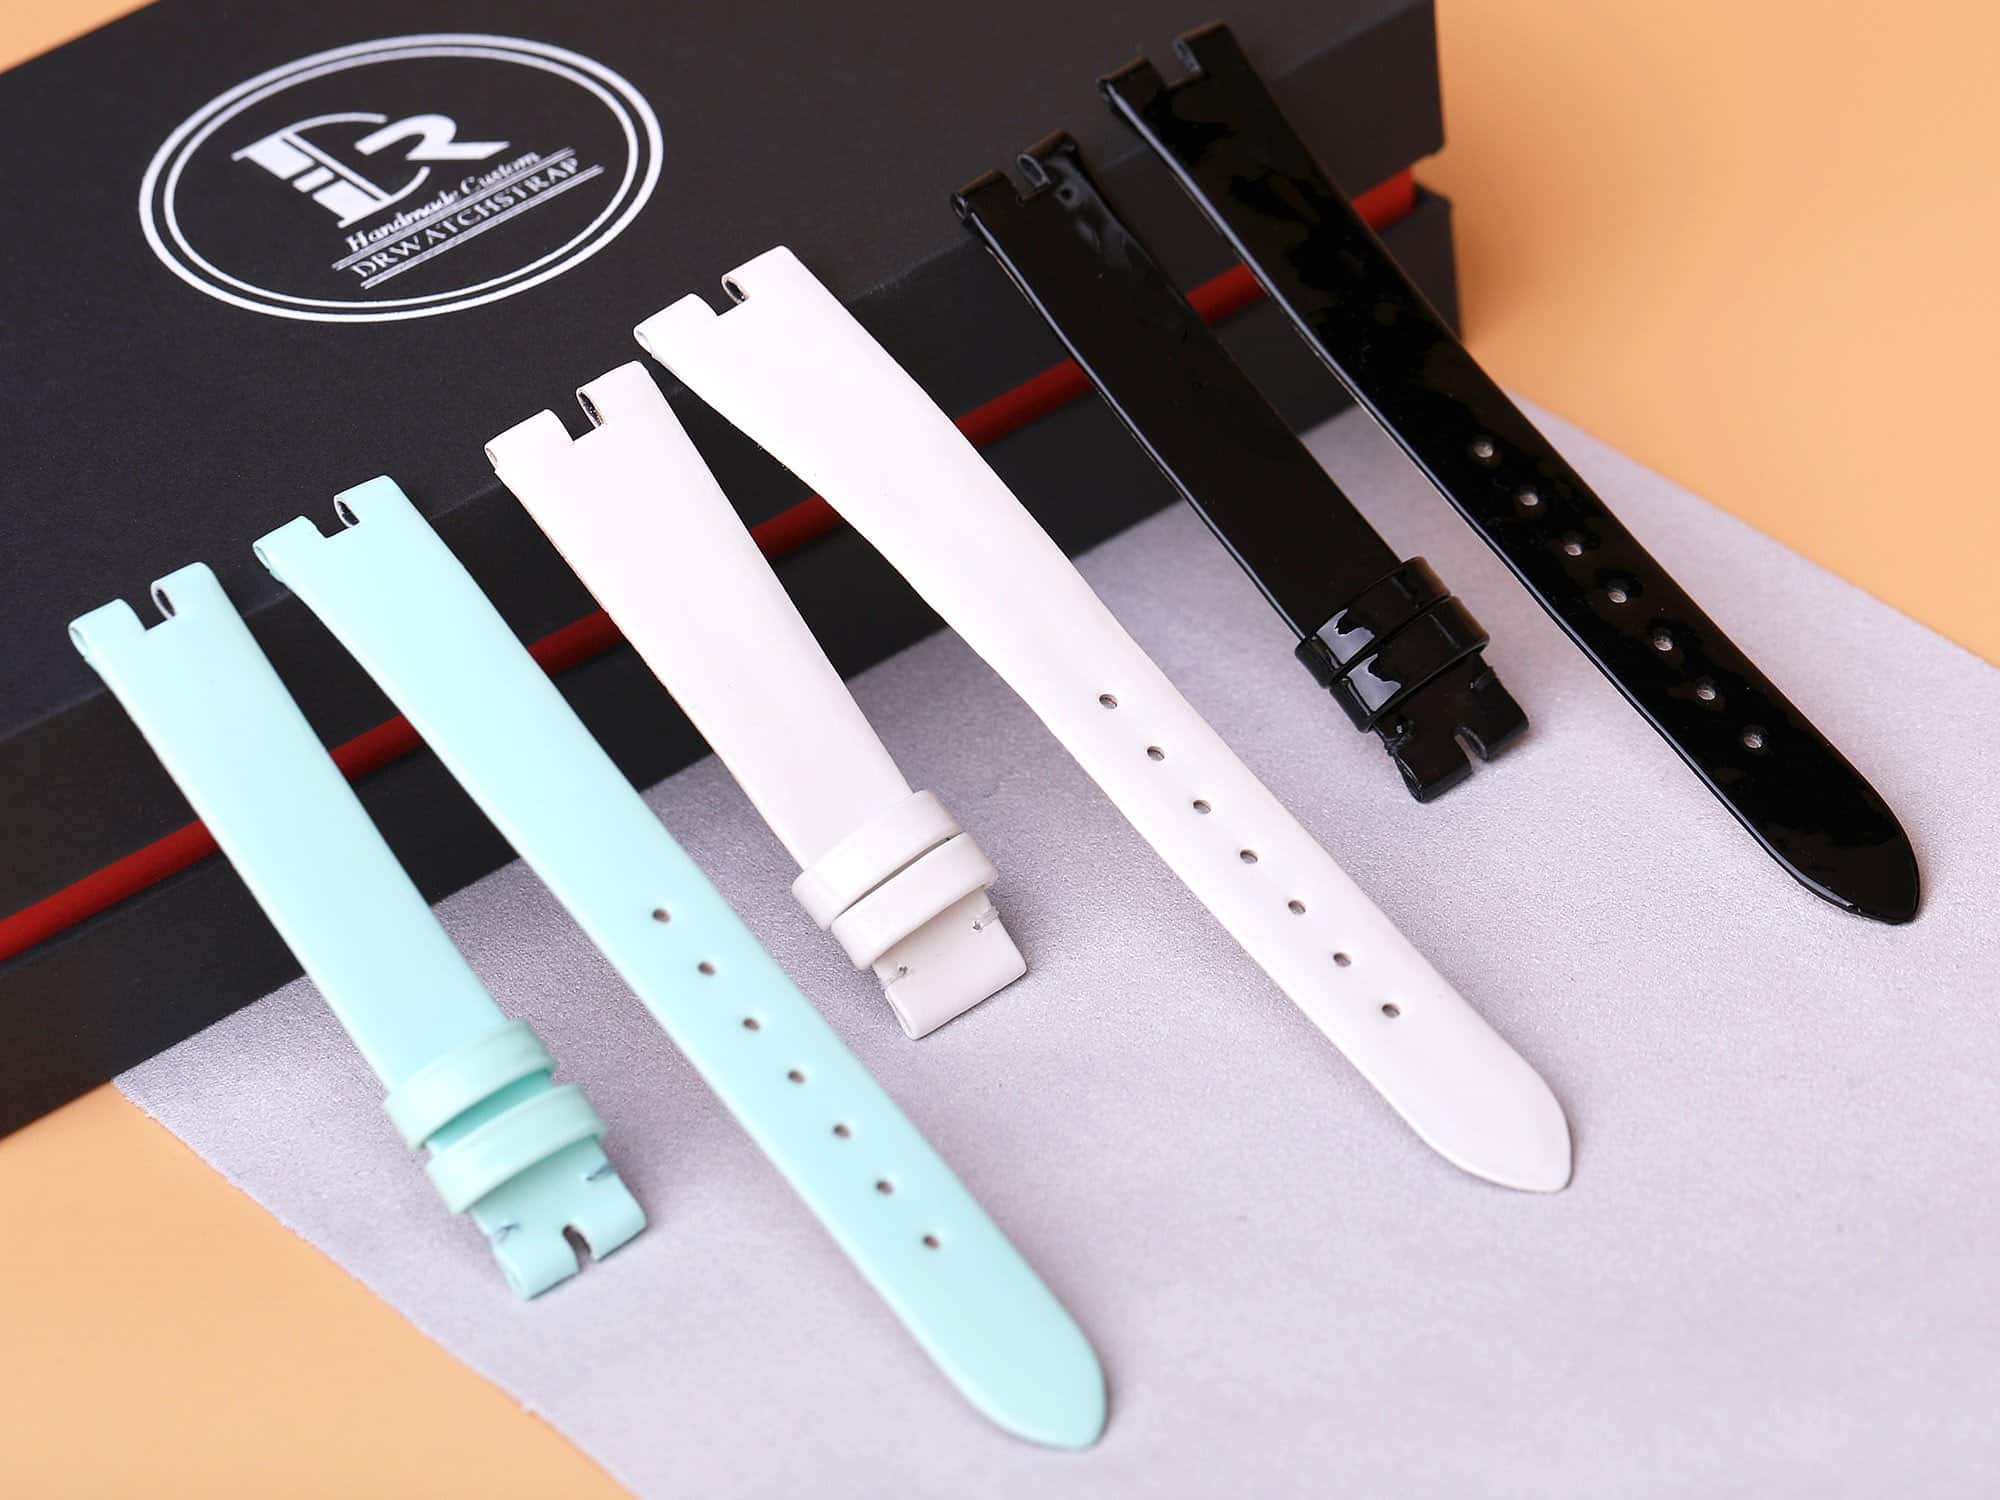 Custom afternarket best high-end quality cyan turquoise ice blue white black satin leather Bulgari Bvlgari B.Zero1 watch band & watch strap replacement for Bvlgari luxury mens women watches - Shop the premium satin material straps and wrist bands for sale low price from dr watchstrap